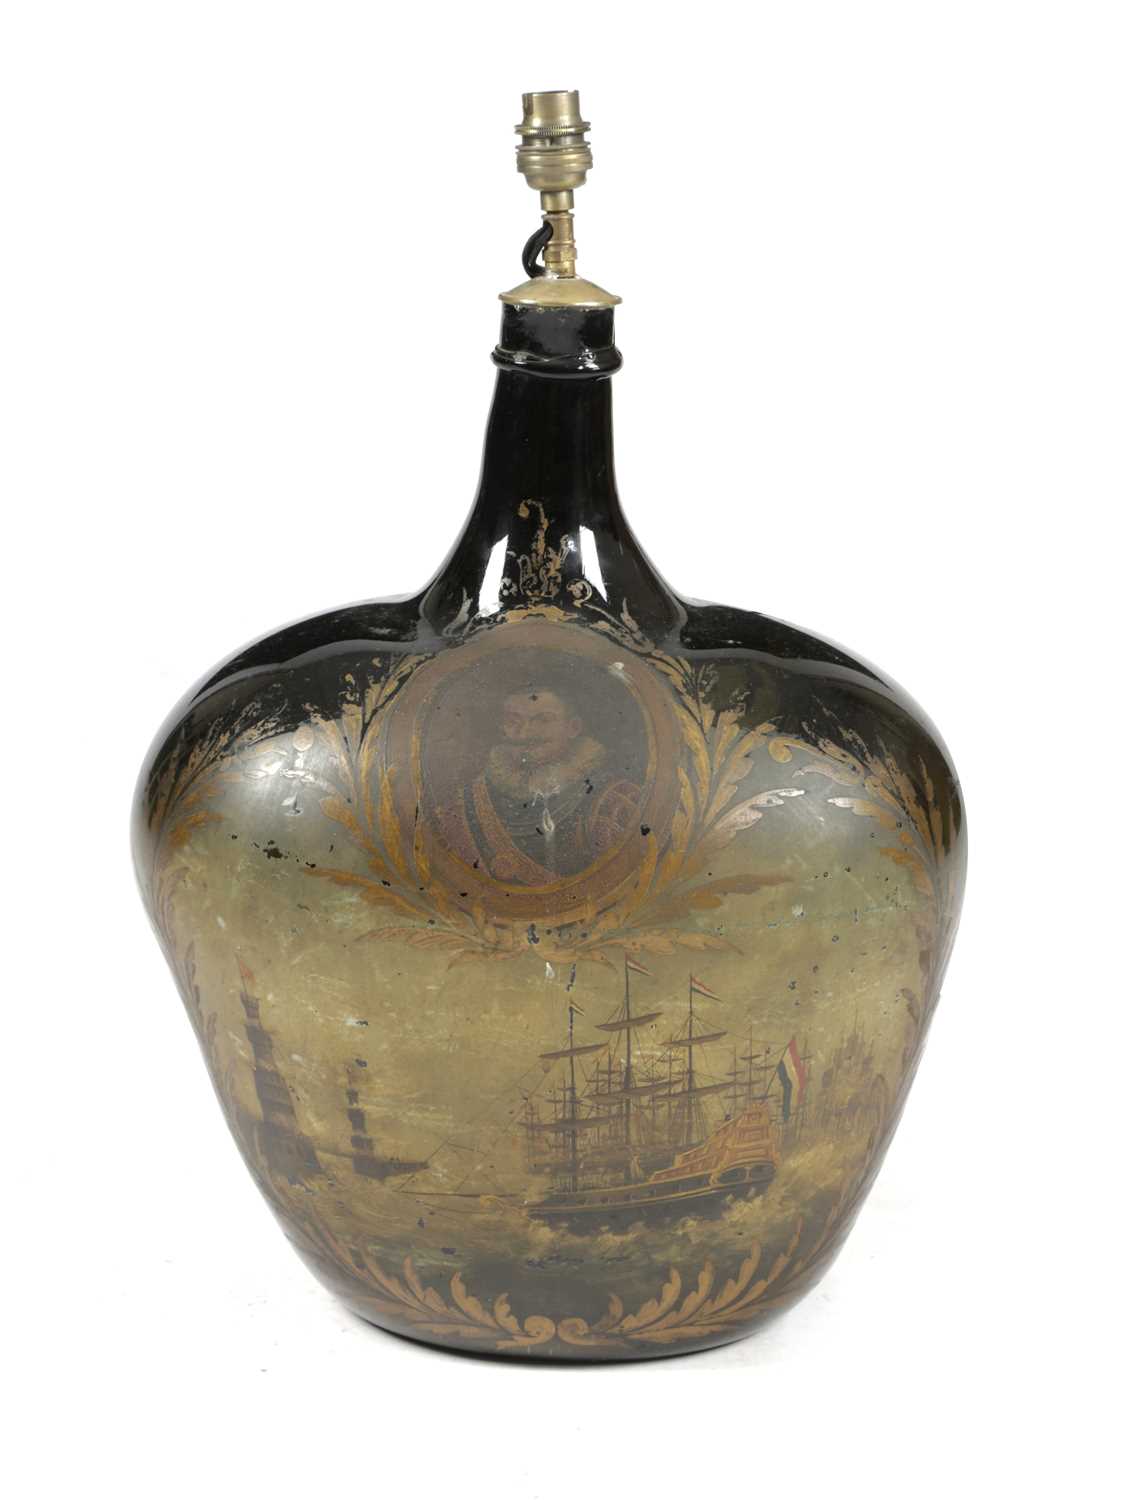 A LARGE DUTCH GREEN GLASS ONION BOTTLE C.1700 painted with an oval portrait of Admiral Piet